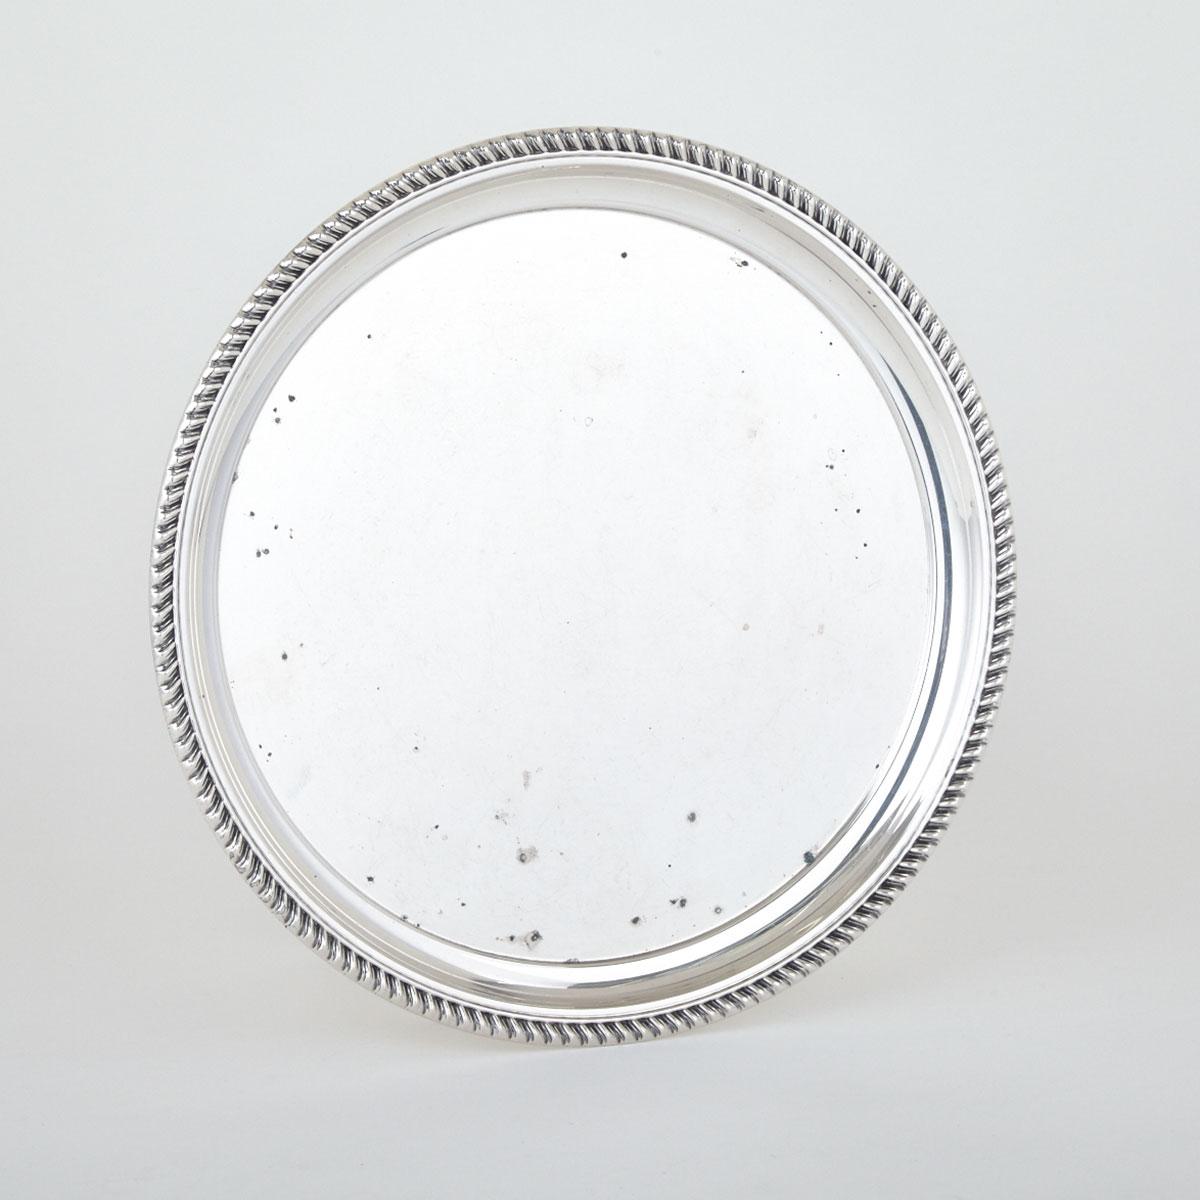 Canadian Silver Circular Waiter, Henry Birks & Sons, Montreal, Que., 1962